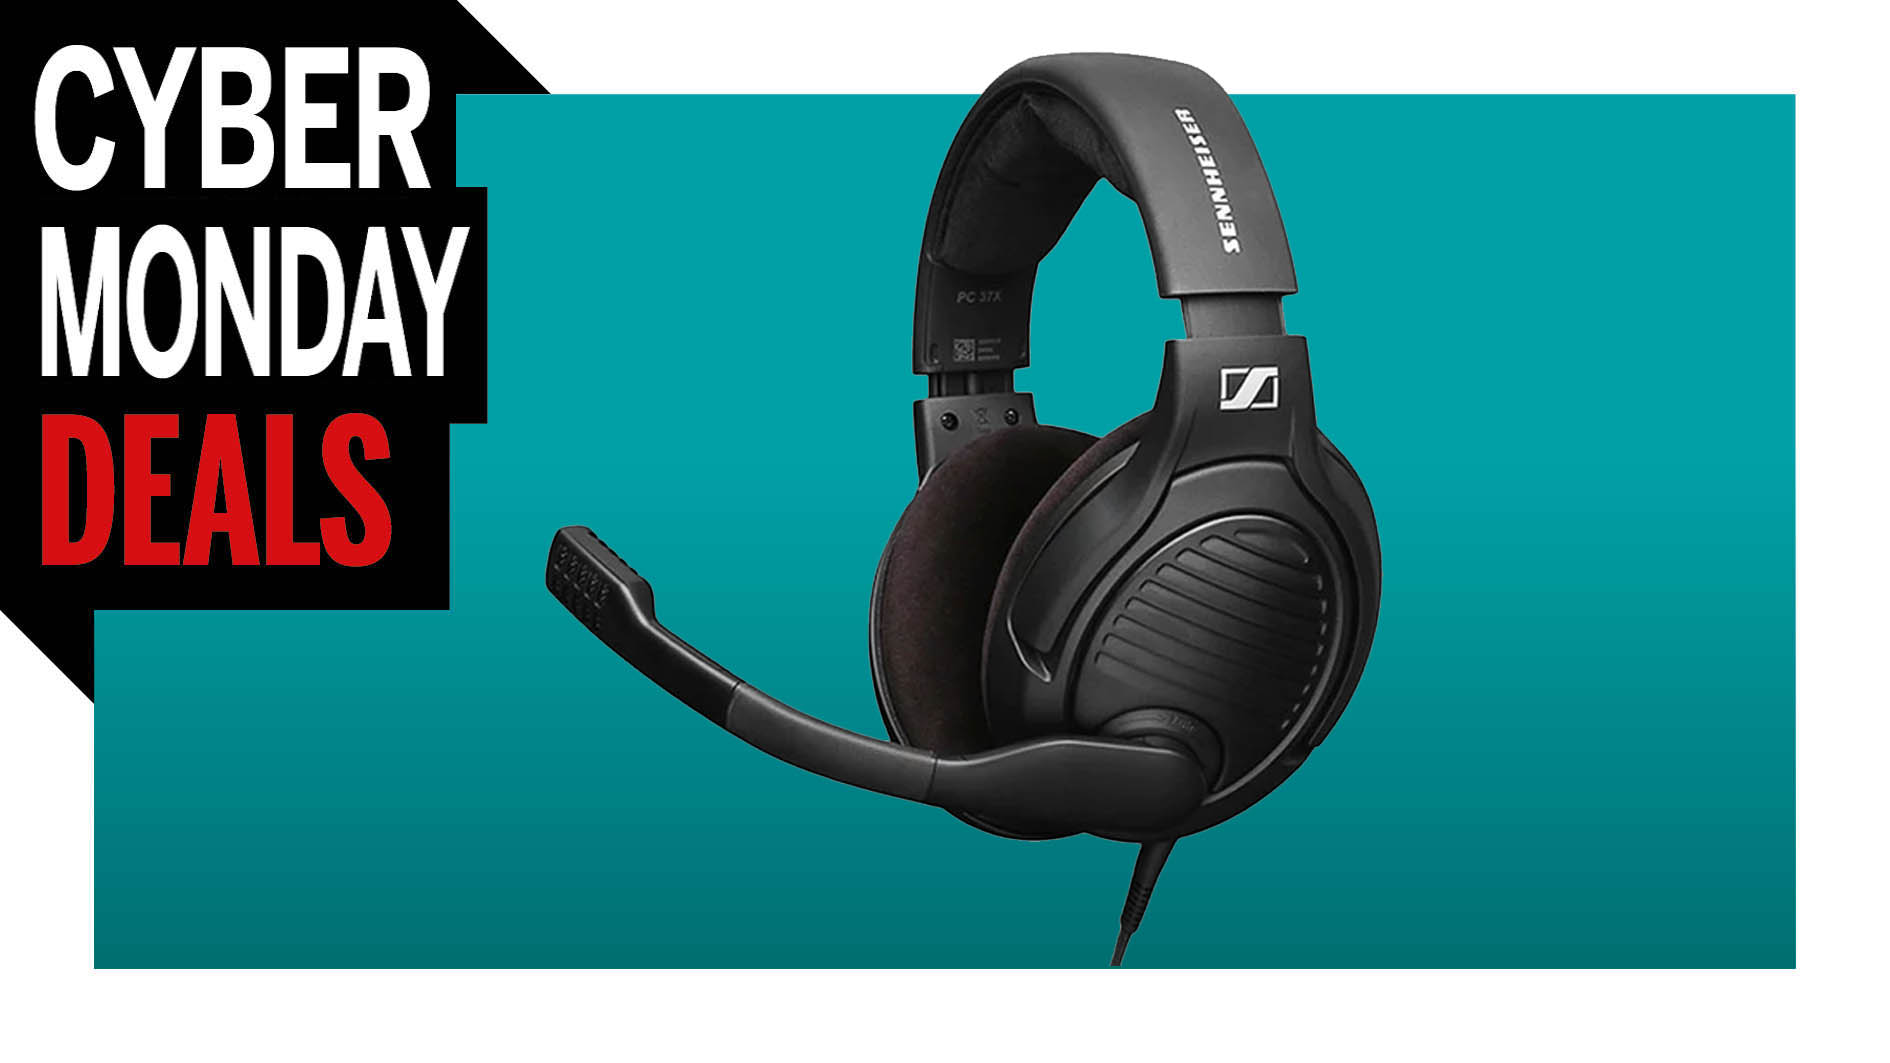  This highly regarded gaming headset made with Sennheiser is now $90 